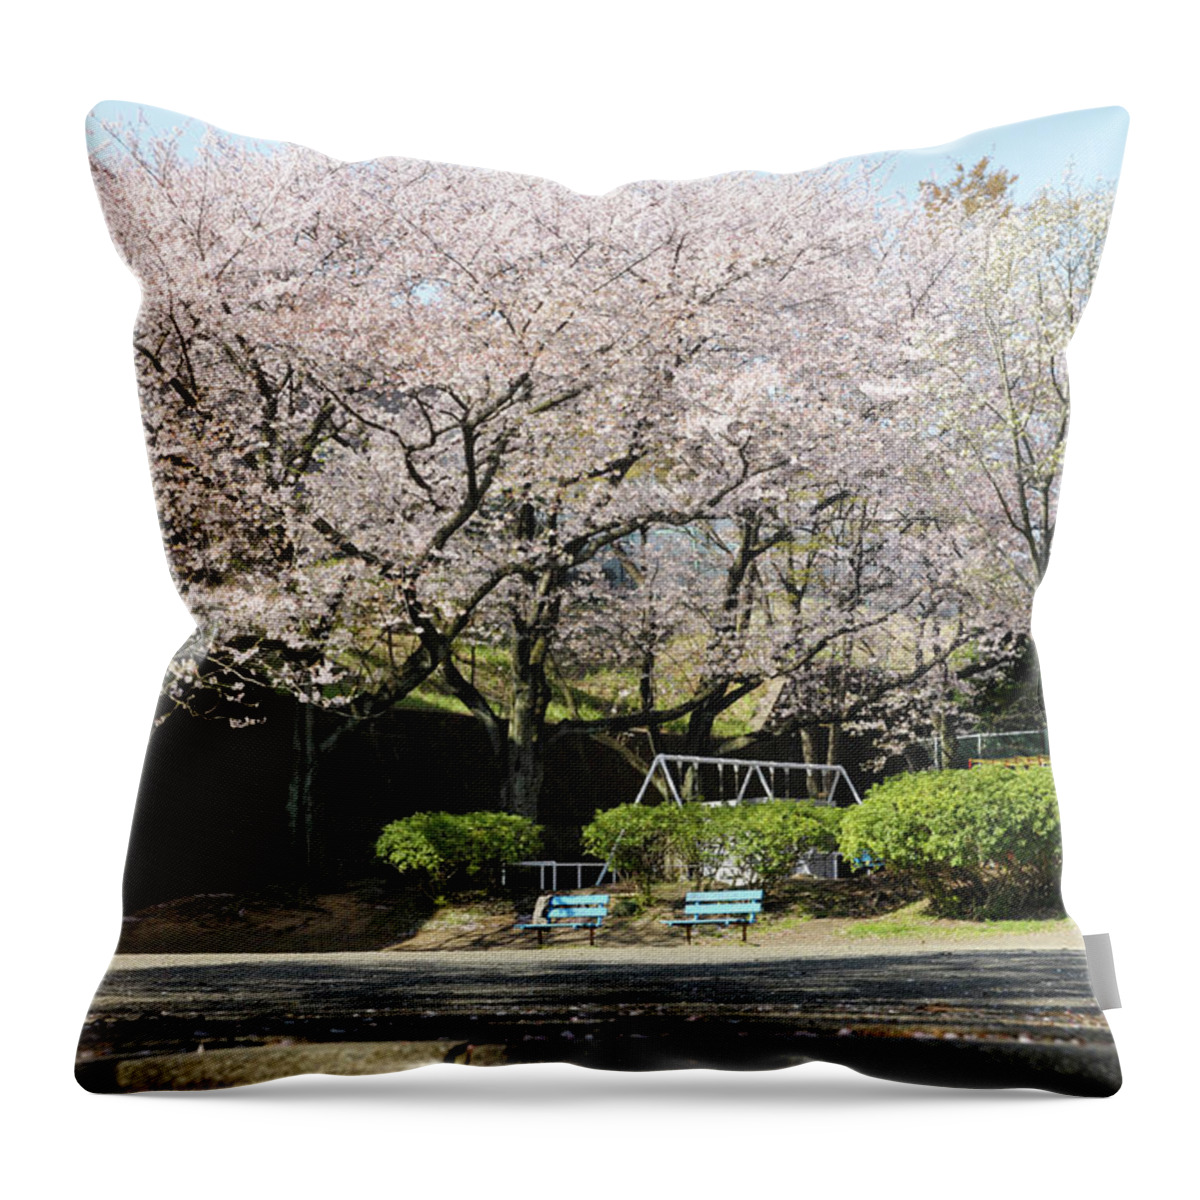 Tranquility Throw Pillow featuring the photograph Cherry Blossoms by Akiko Aoki